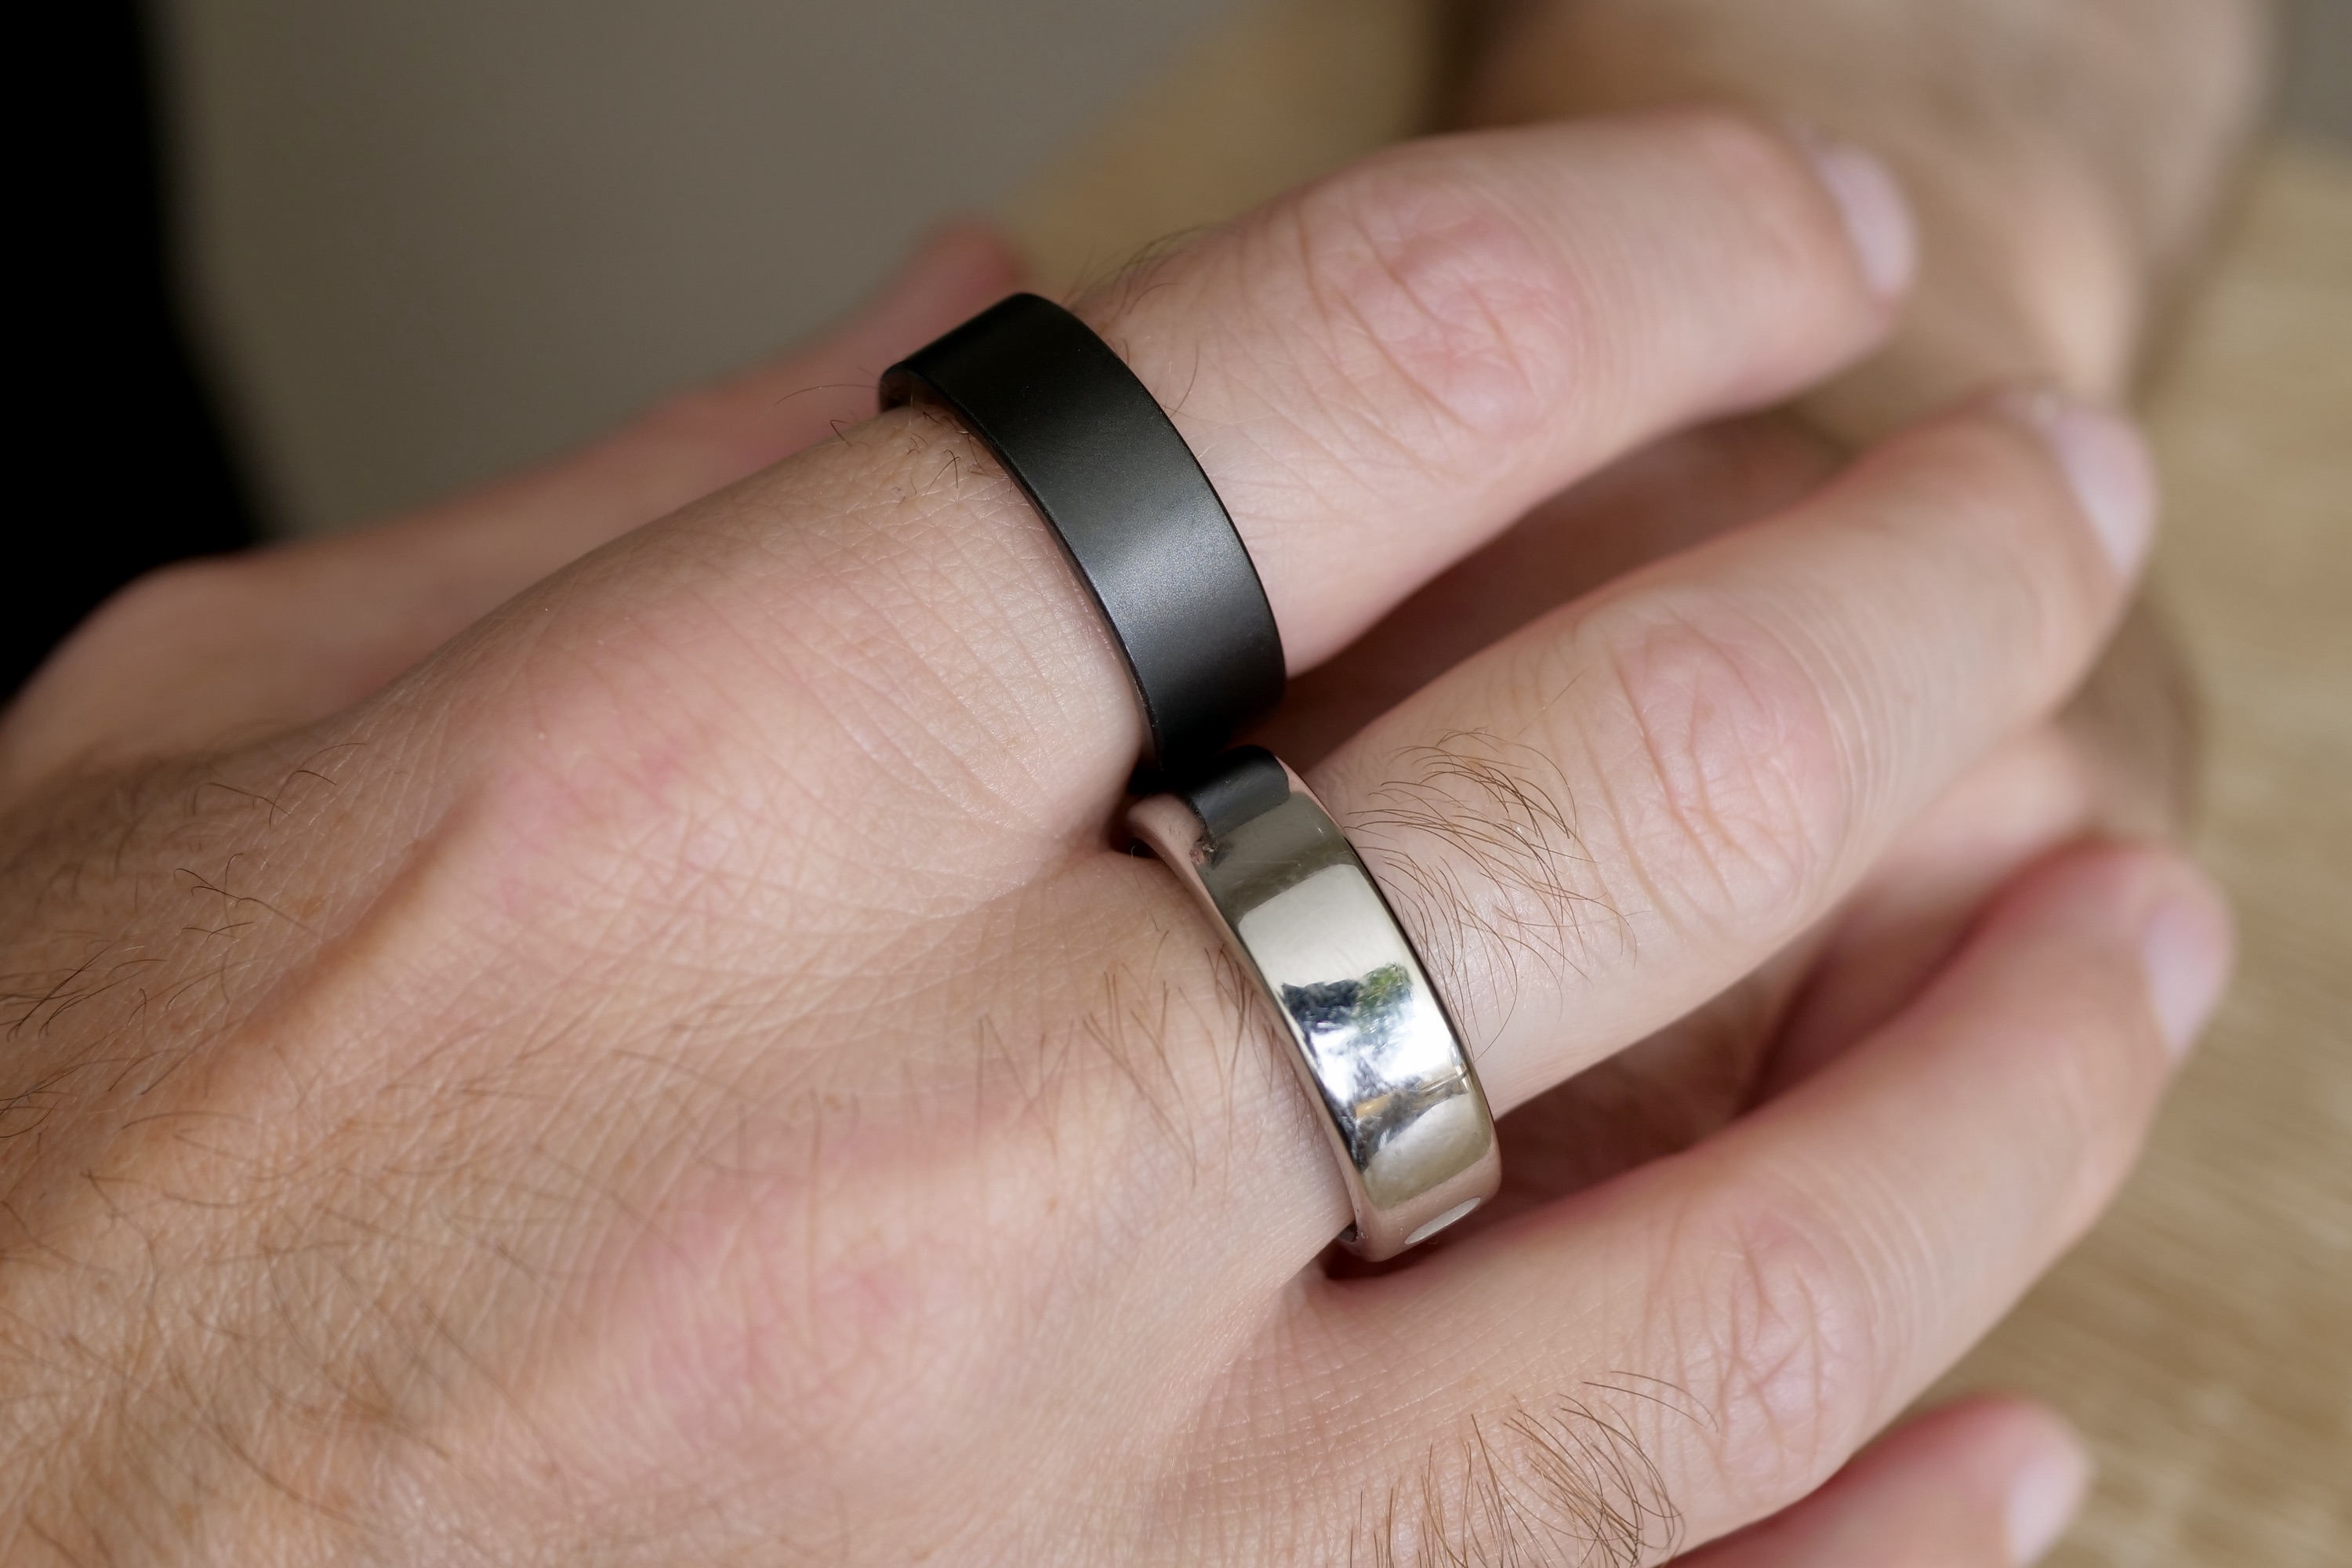 Ring One : The most advanced Smart Ring for you | Indiegogo